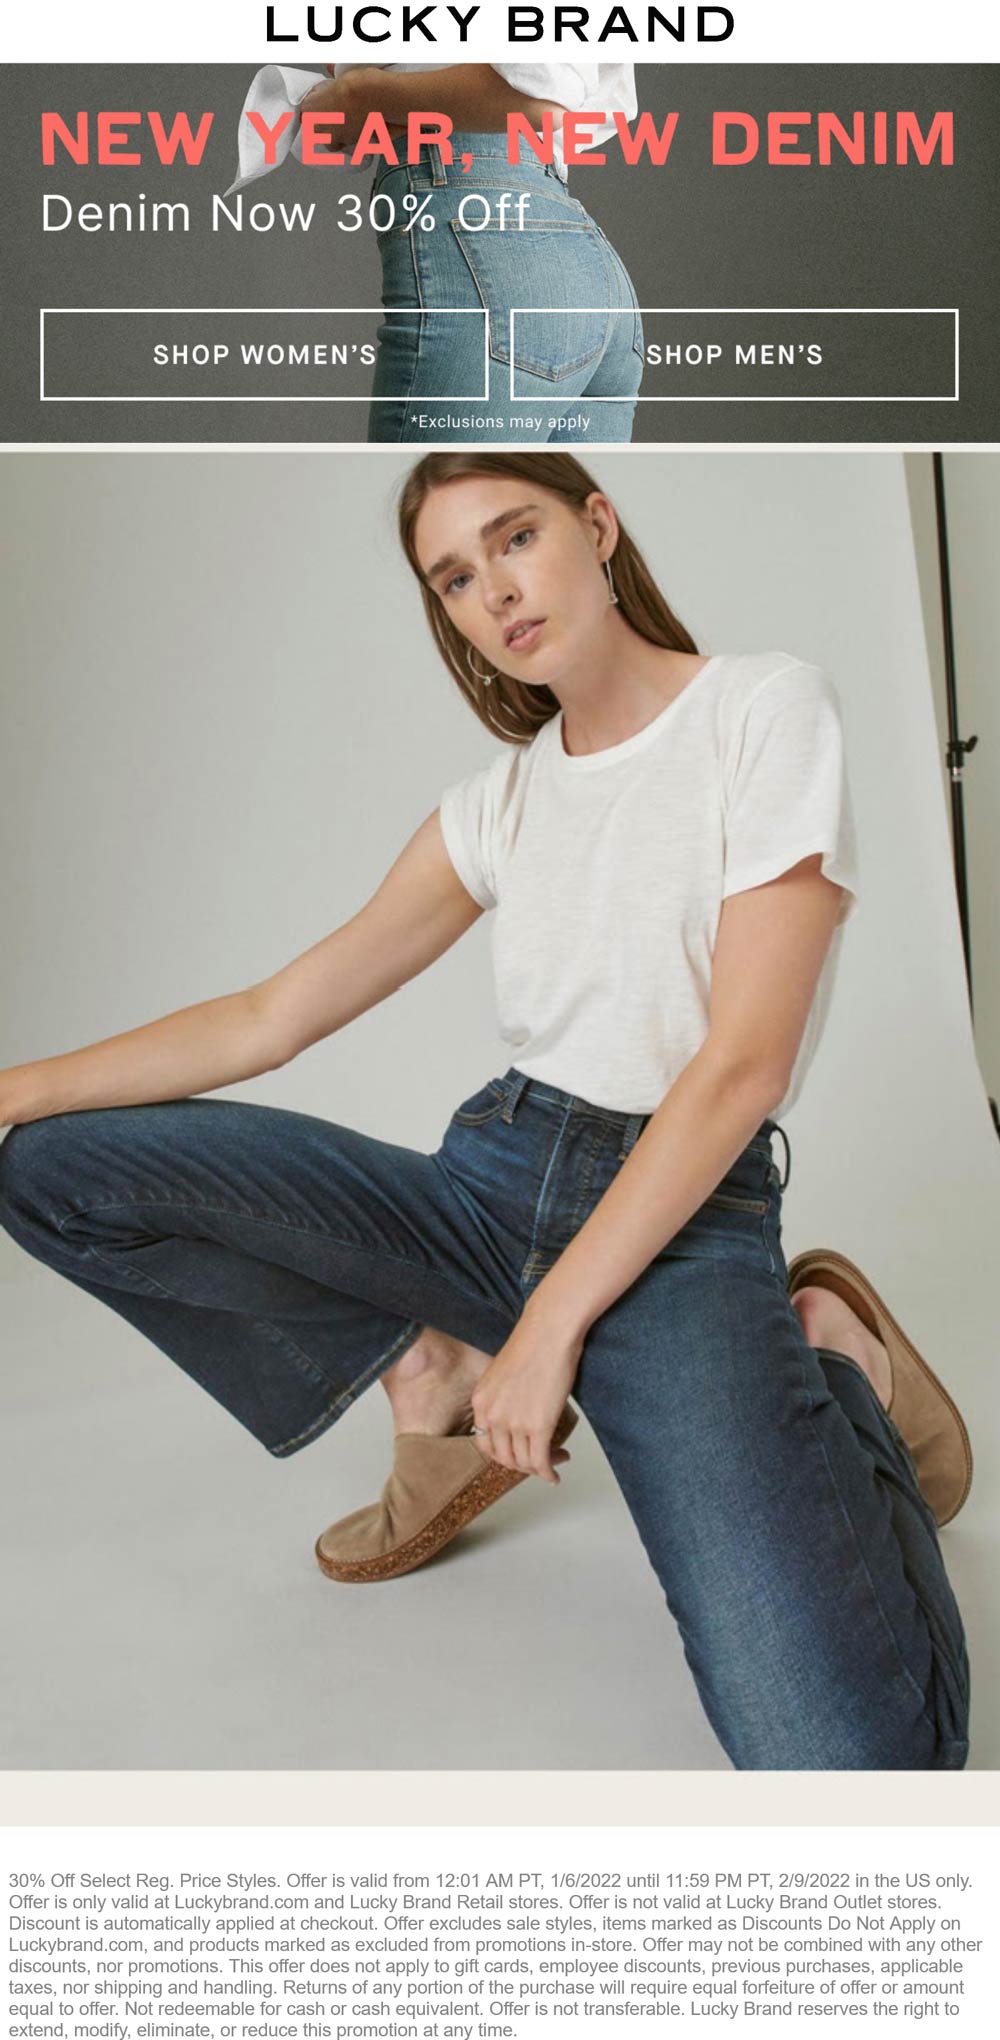 Lucky Brand stores Coupon  30% off denim at Lucky Brand, ditto online #luckybrand 